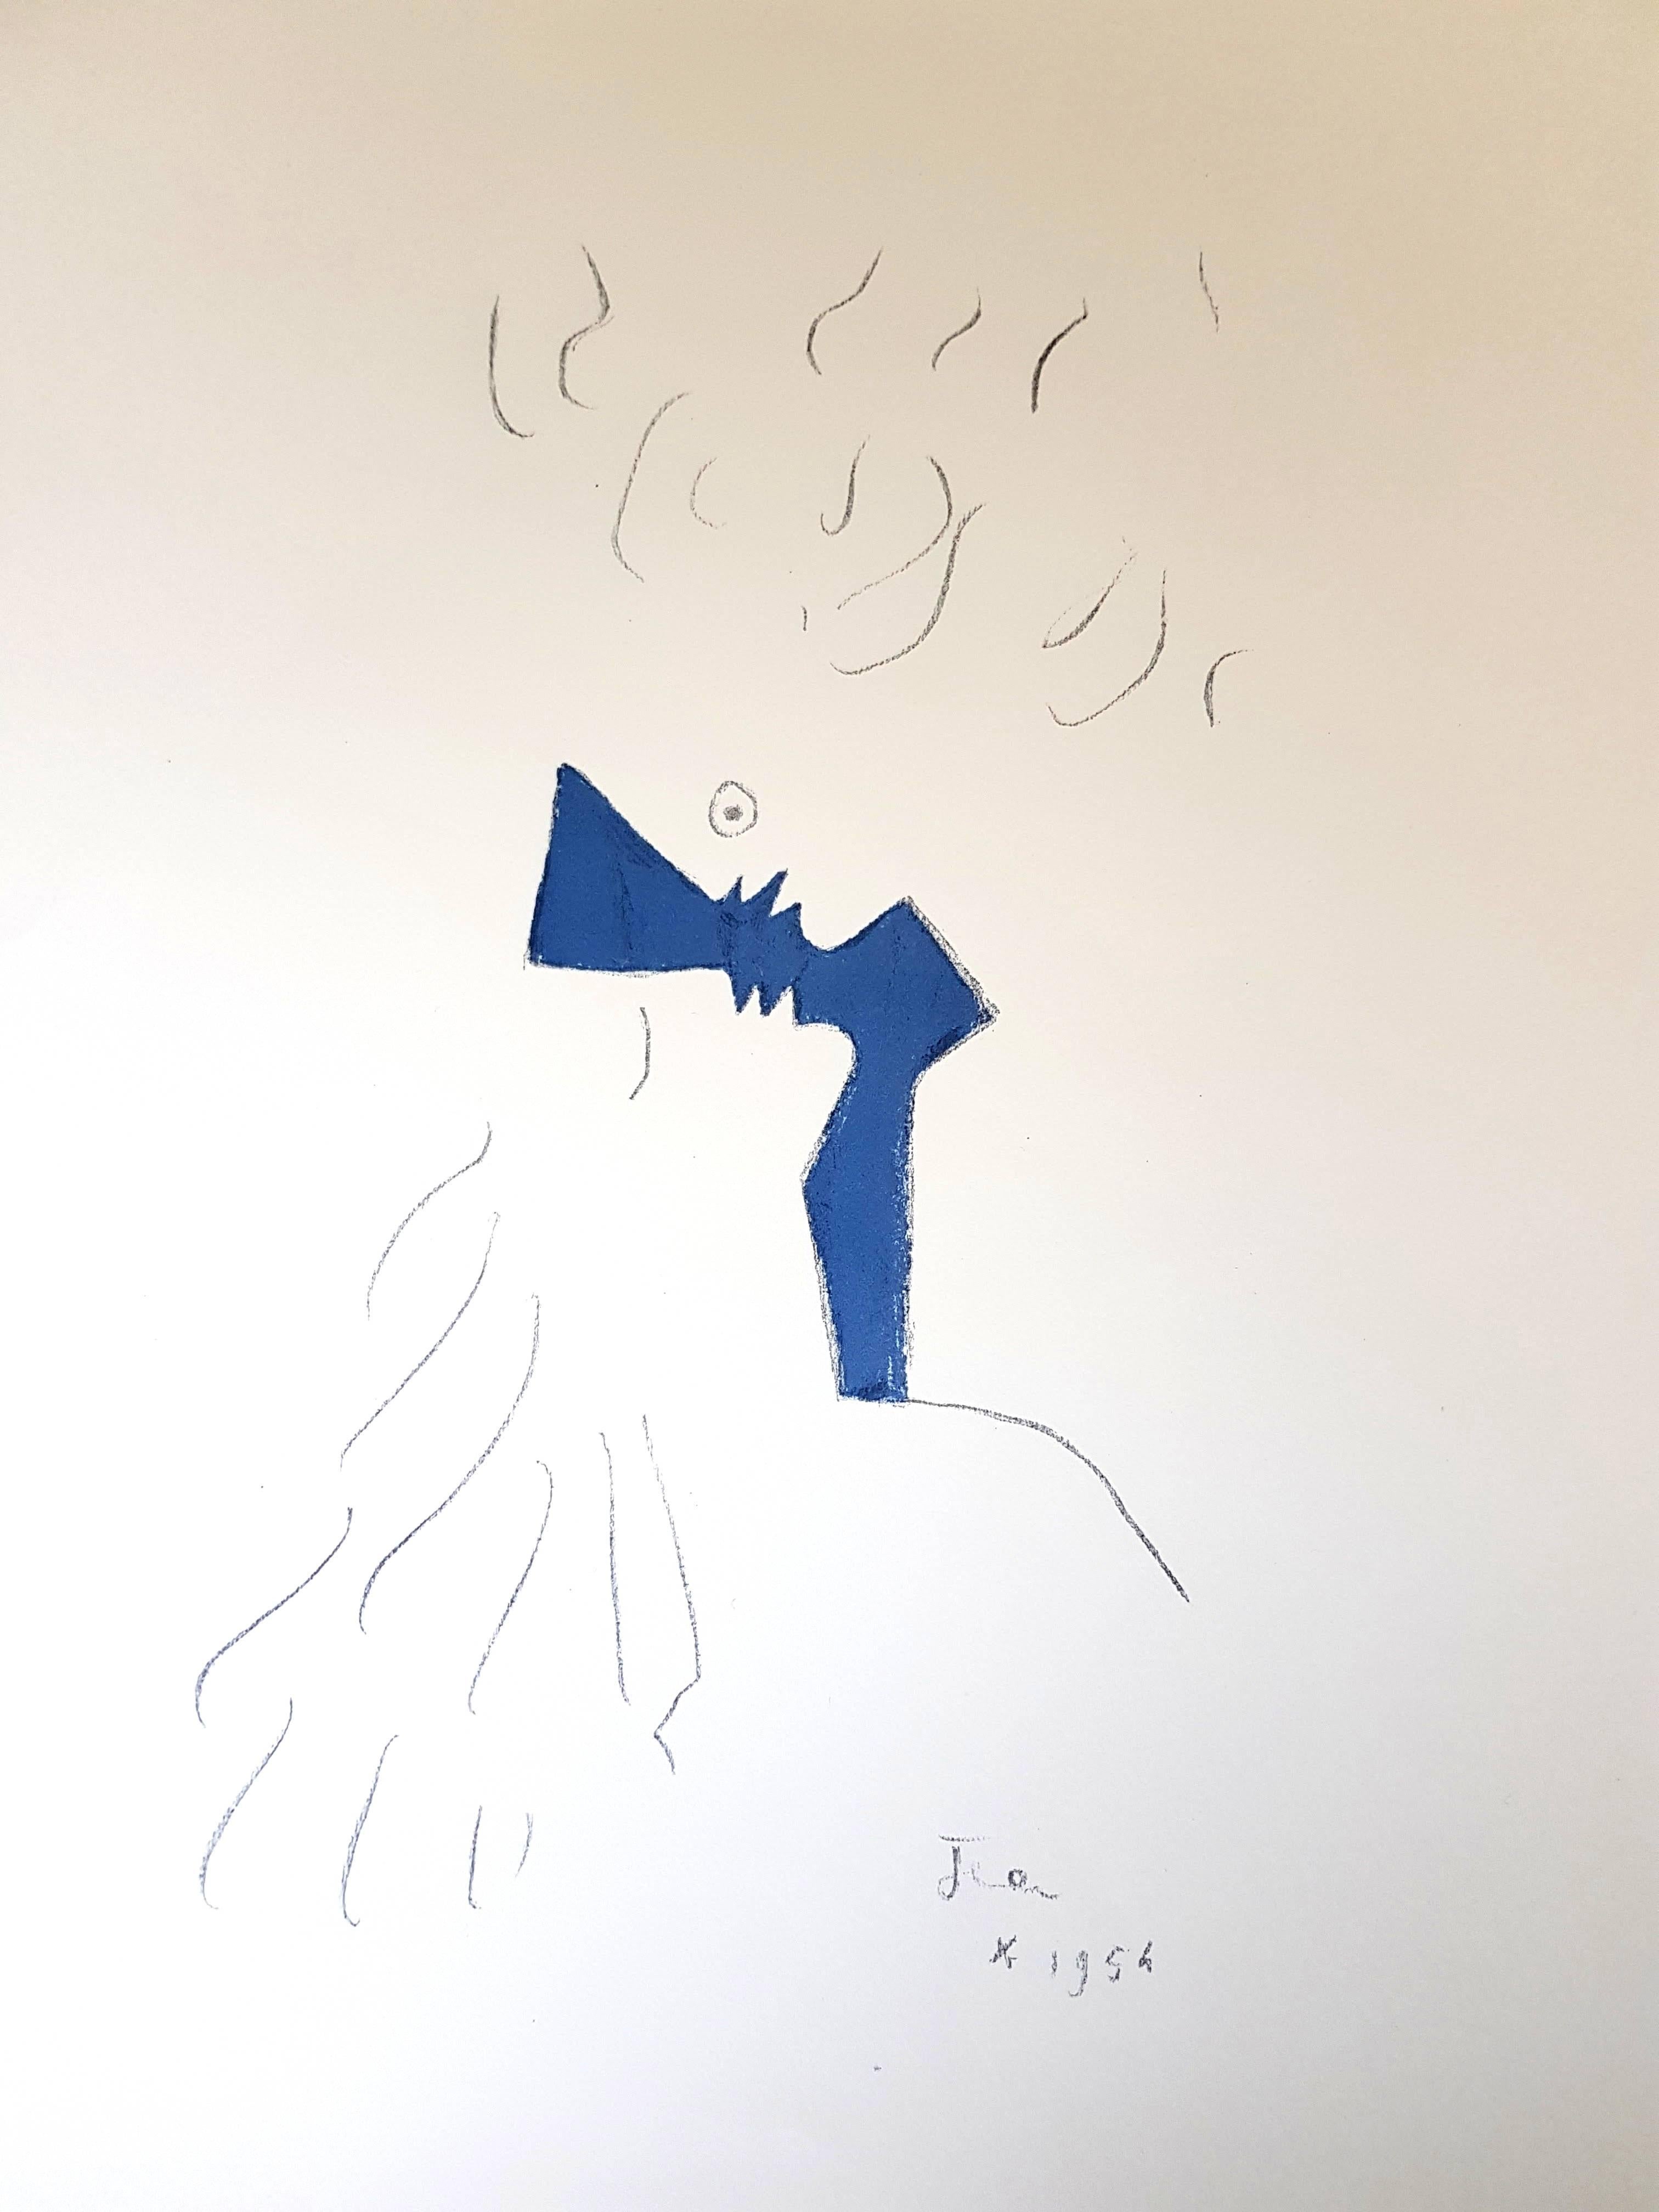 Jean Cocteau - Under the Fire Coat - Lovers - Original Lithograph
Signed "Jean" in the plate and dated 1954 in the plate.
Joseph Forêt Editions
Dimensions: 41 x 33 cm
Vellum paper.
Edition: 227